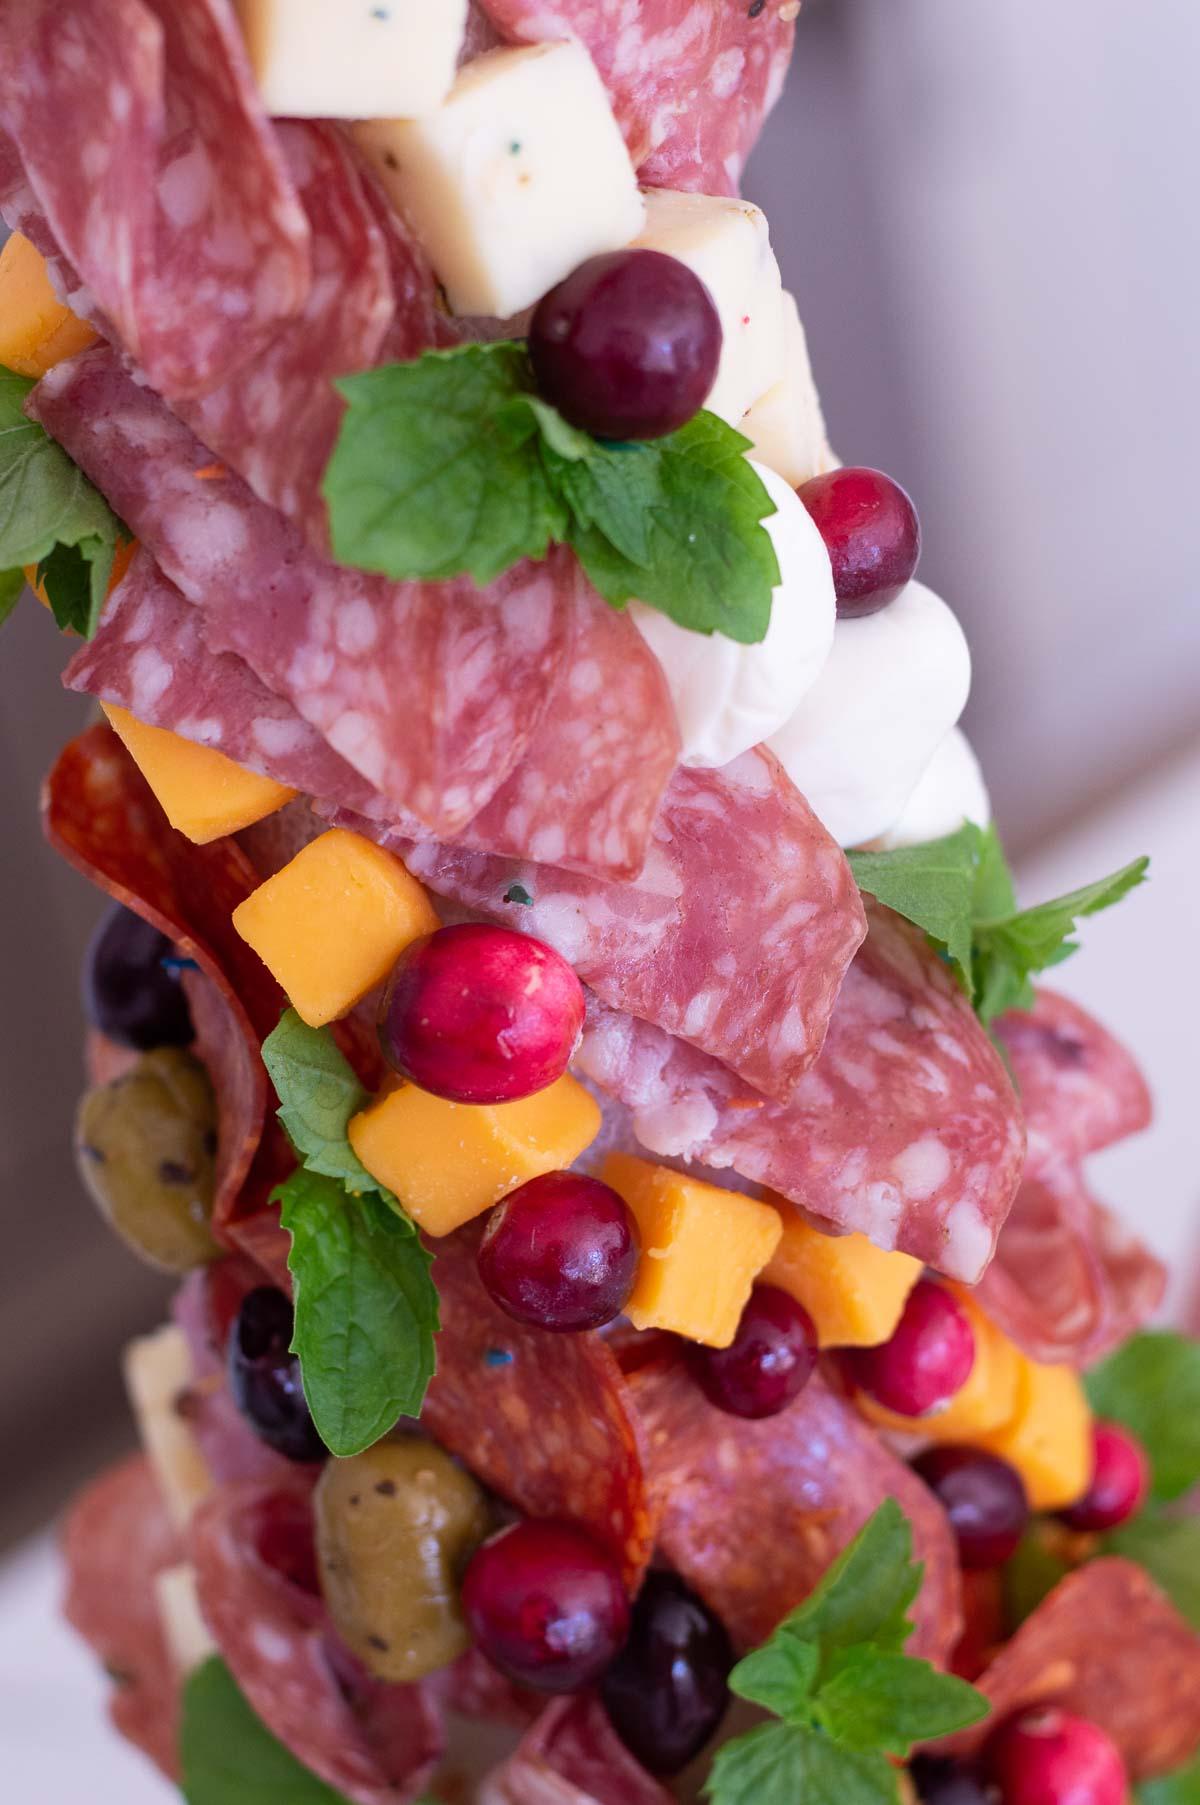 How to make a charcuterie tree cheese and salami on a tree